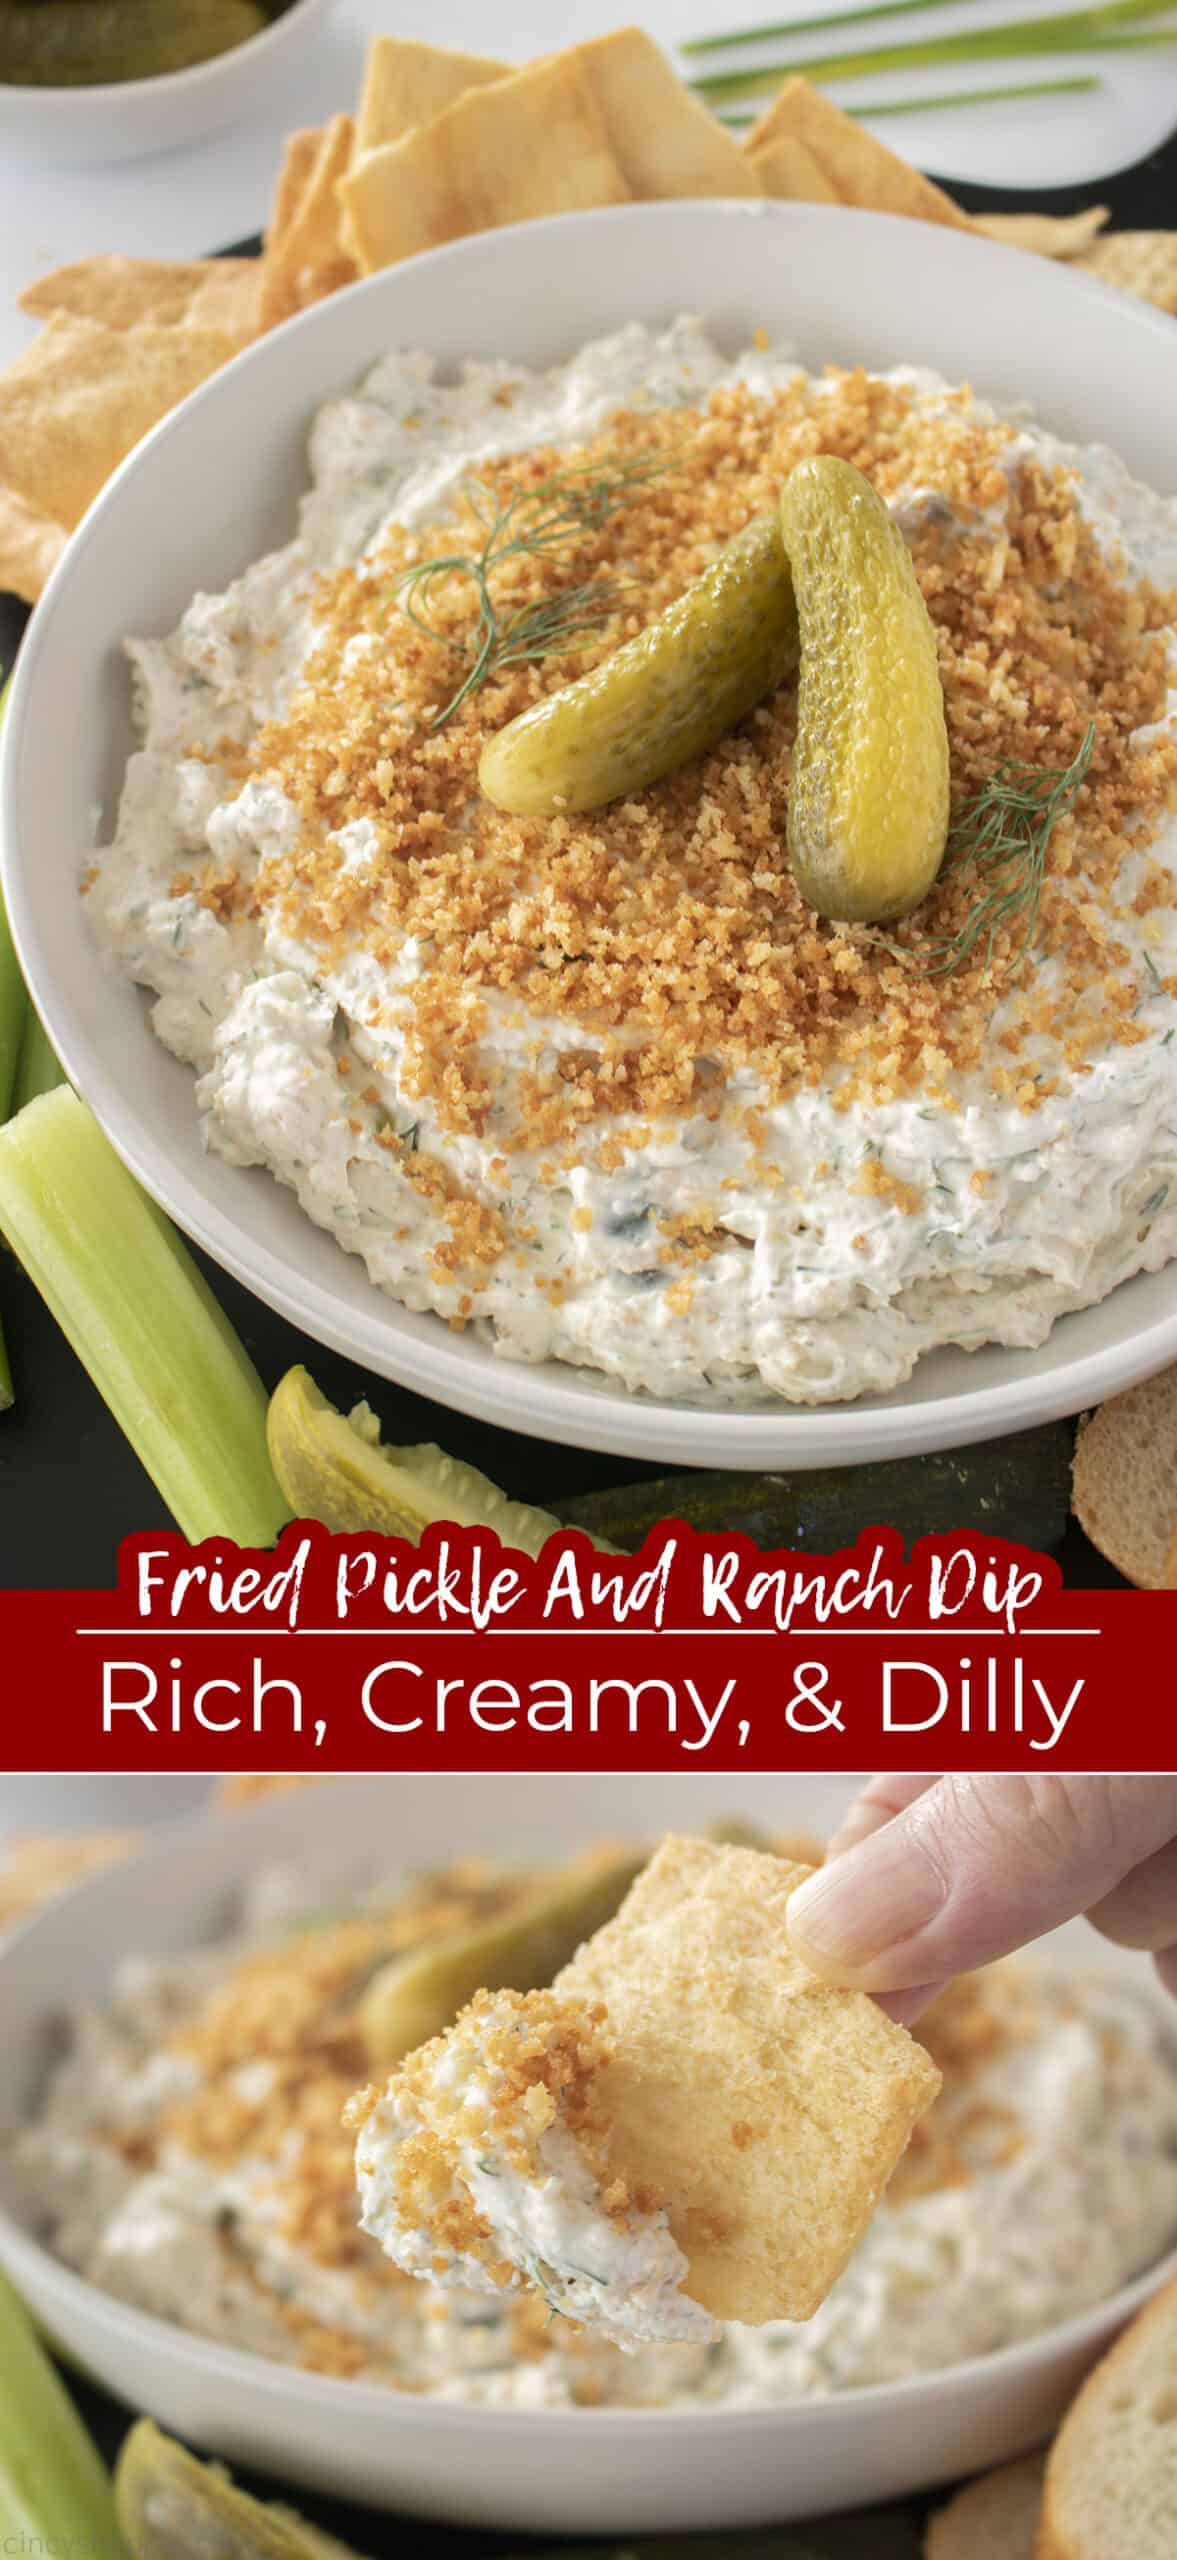 Fried Pickle and Ranch Dip Rich, Creamy, & Dilly long pin.